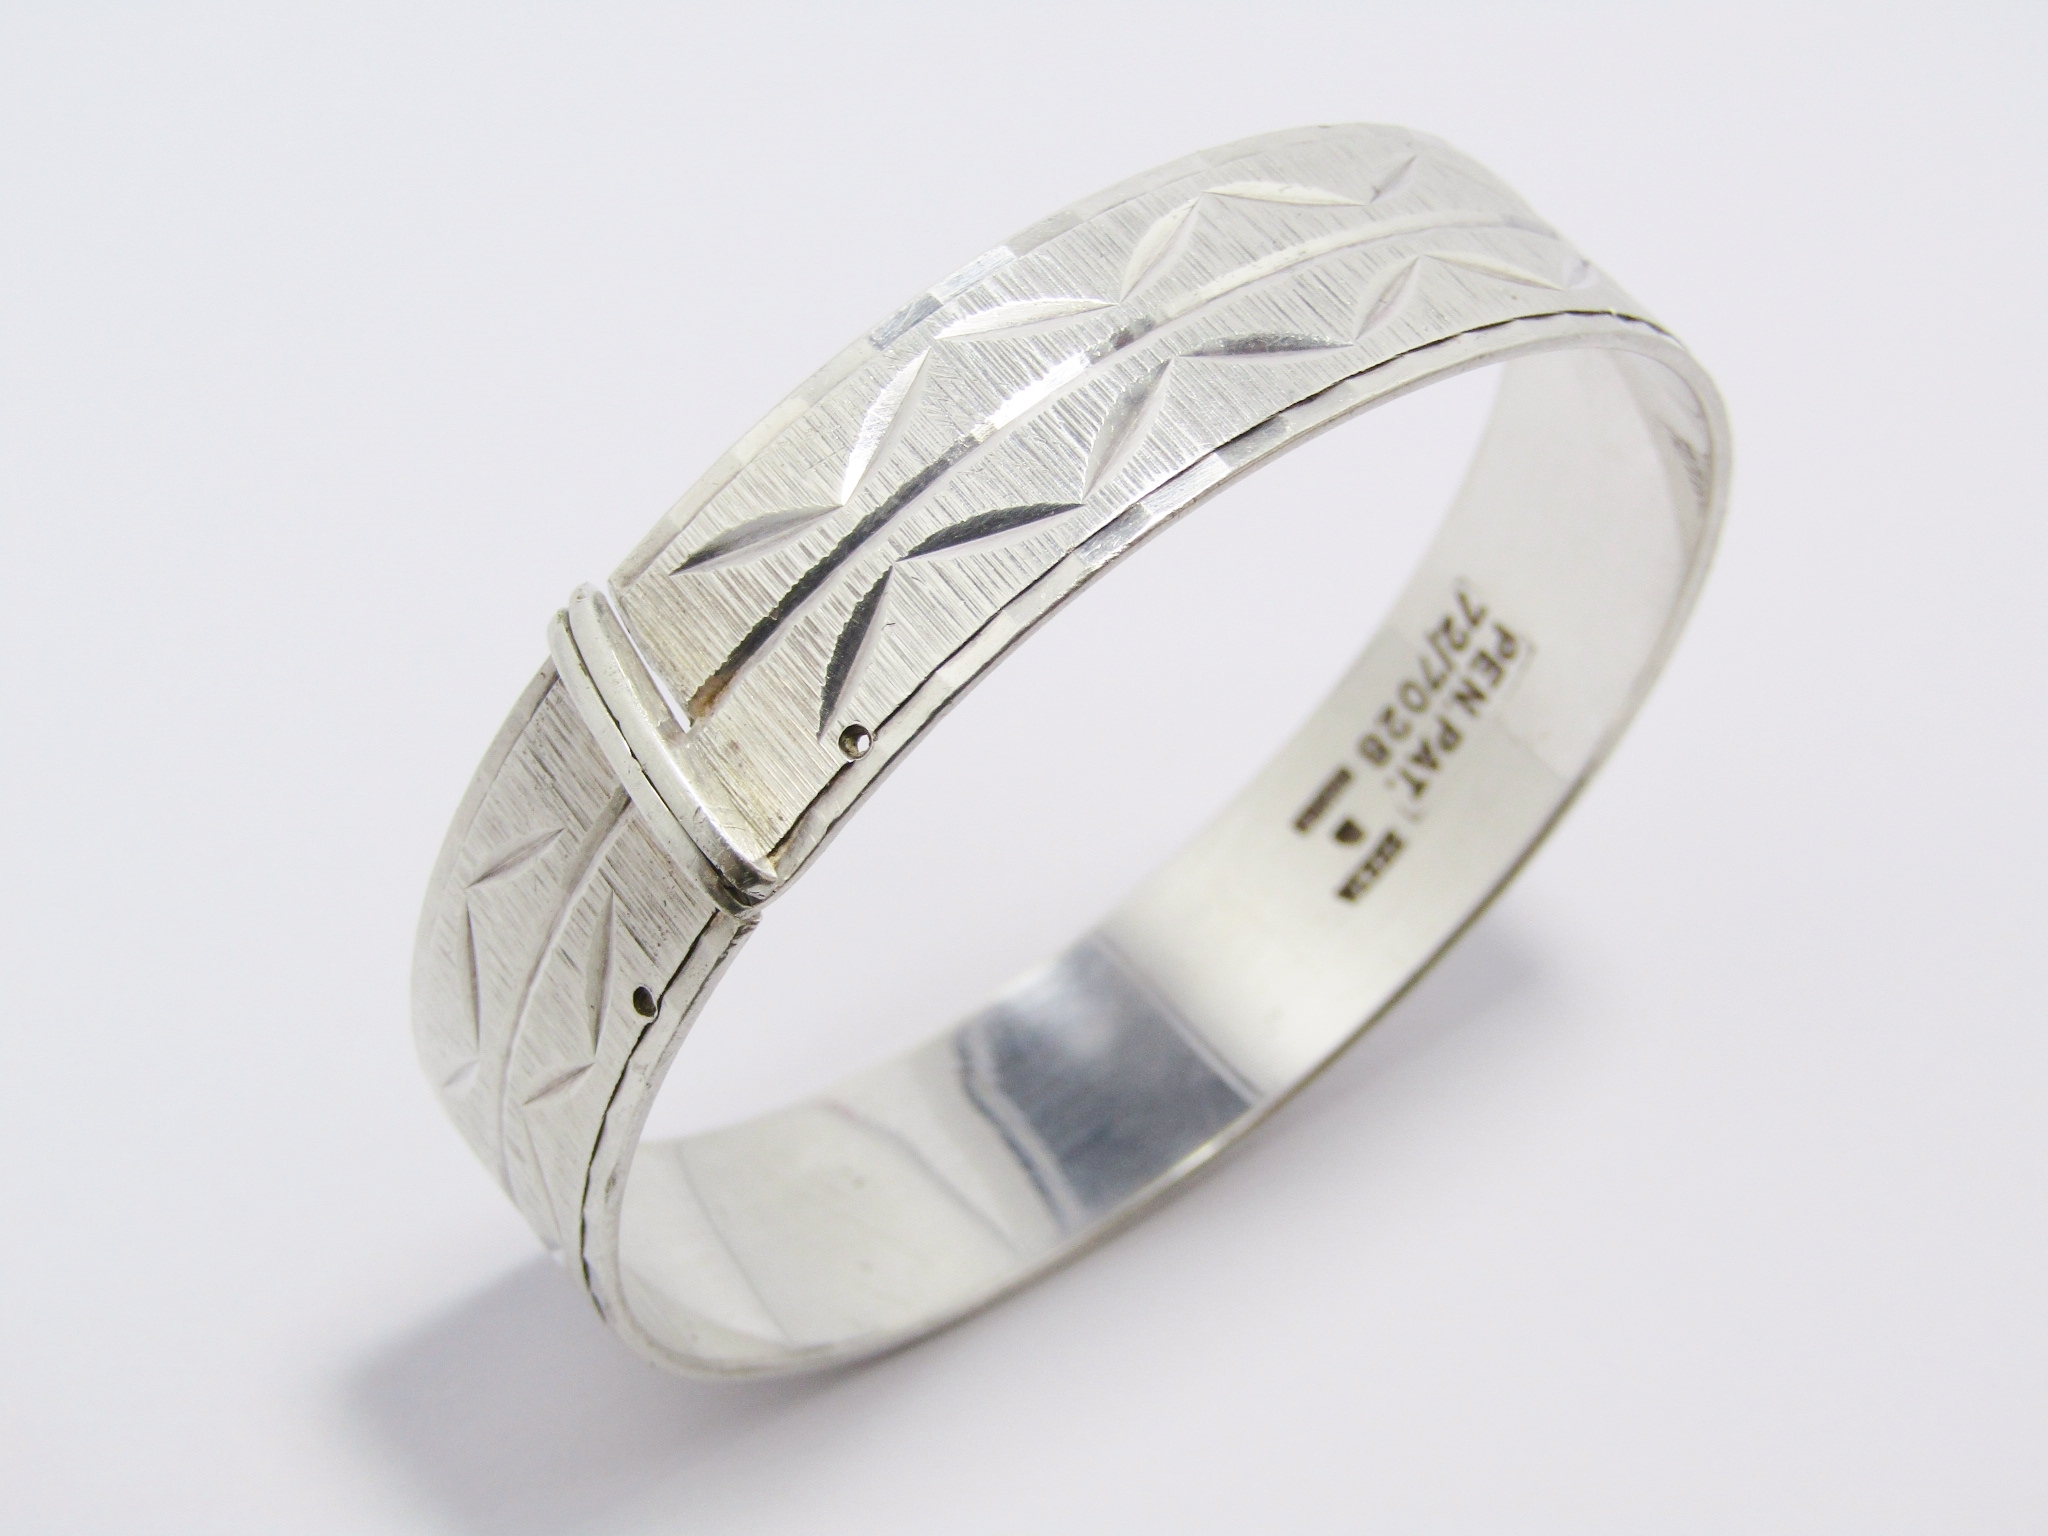 A Gorgeous Vintage Textured Hinged Bangle in Sterling Silver.